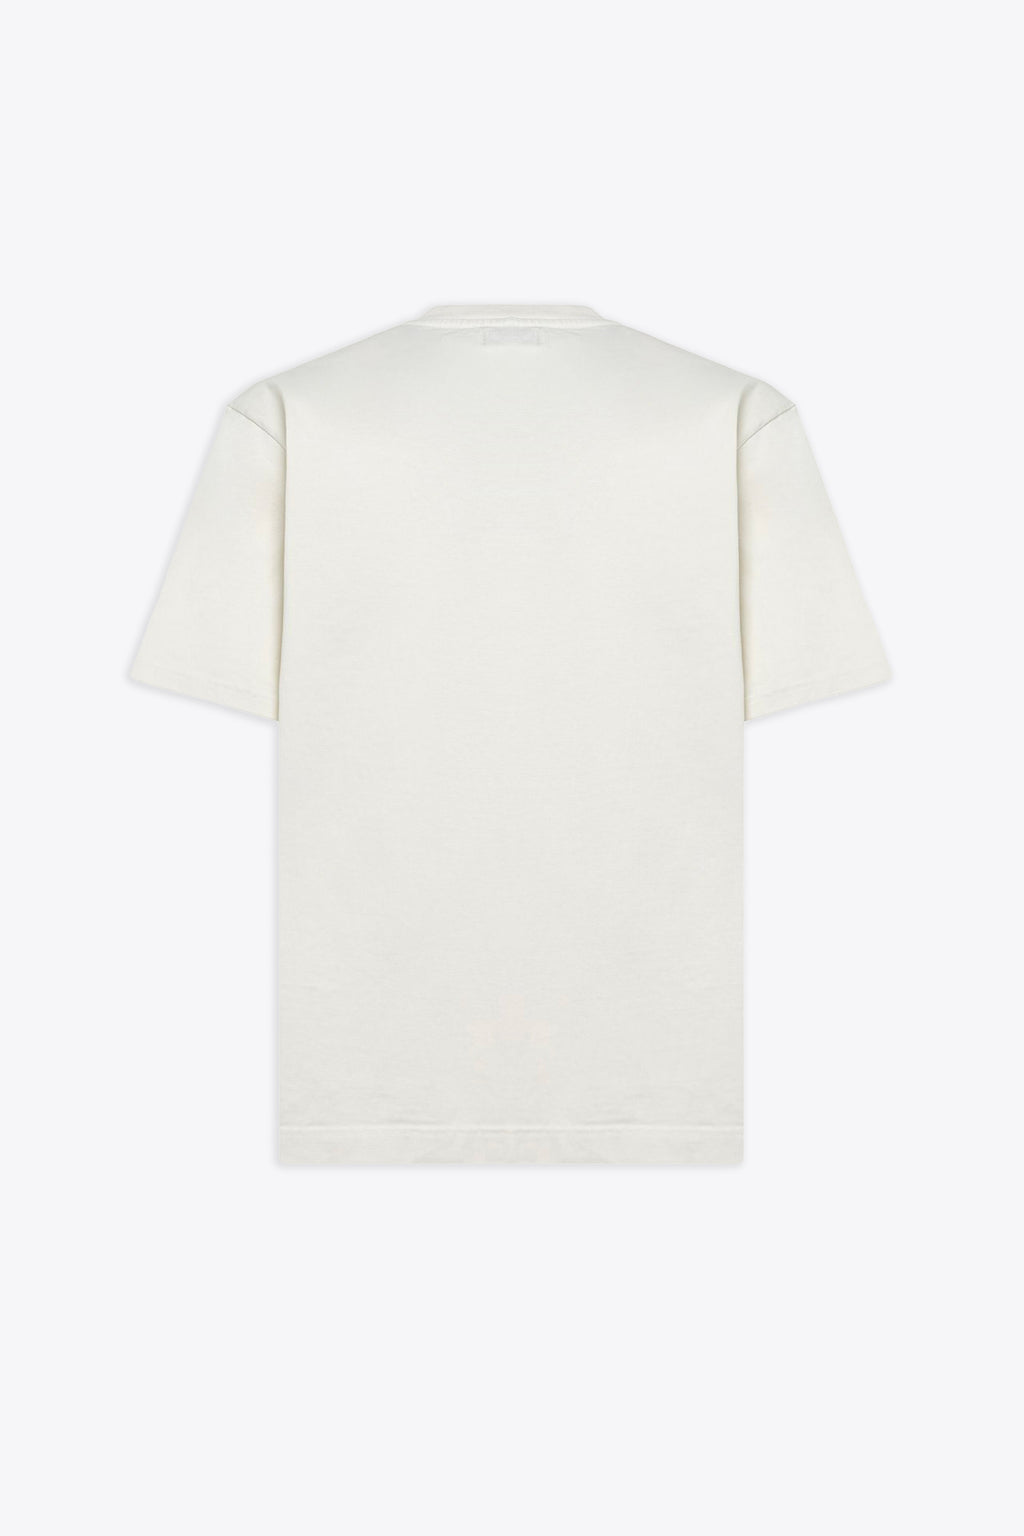 alt-image__Ivory-white-relaxed-fit-t-shirt-